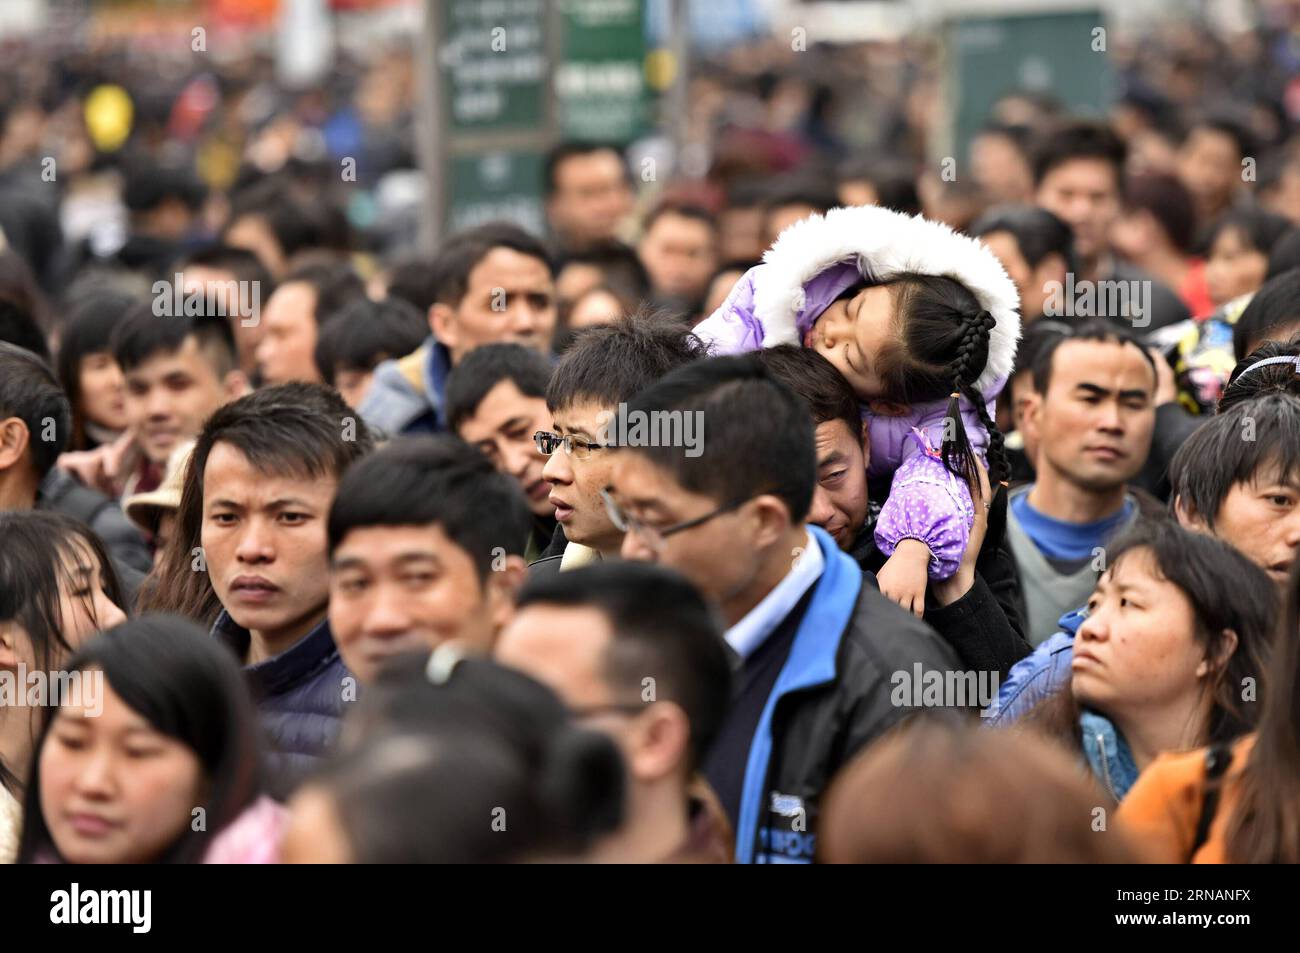 (160202) -- GUANGZHOU, Feb. 2, 2016 -- Passengers rushing home for the coming Spring Festival, or the Chinese Lunar New Year, are seen stranded out of Guangzhou railway station in Guangzhou,south China s Guangdong Province, Feb. 2, 2016. Some 50,000 passengers were detained in the railway station due to delays of trains caused by continous bad weather. ) (cxy) CHINA-GUANGZHOU-RAILWAY-PASSENGER-DELAY (CN) LiuxDawei PUBLICATIONxNOTxINxCHN   Guangzhou Feb 2 2016 Passengers Rushing Home for The Coming Spring Festival or The Chinese Lunar New Year are Lakes stranded out of Guangzhou Railway Station Stock Photo